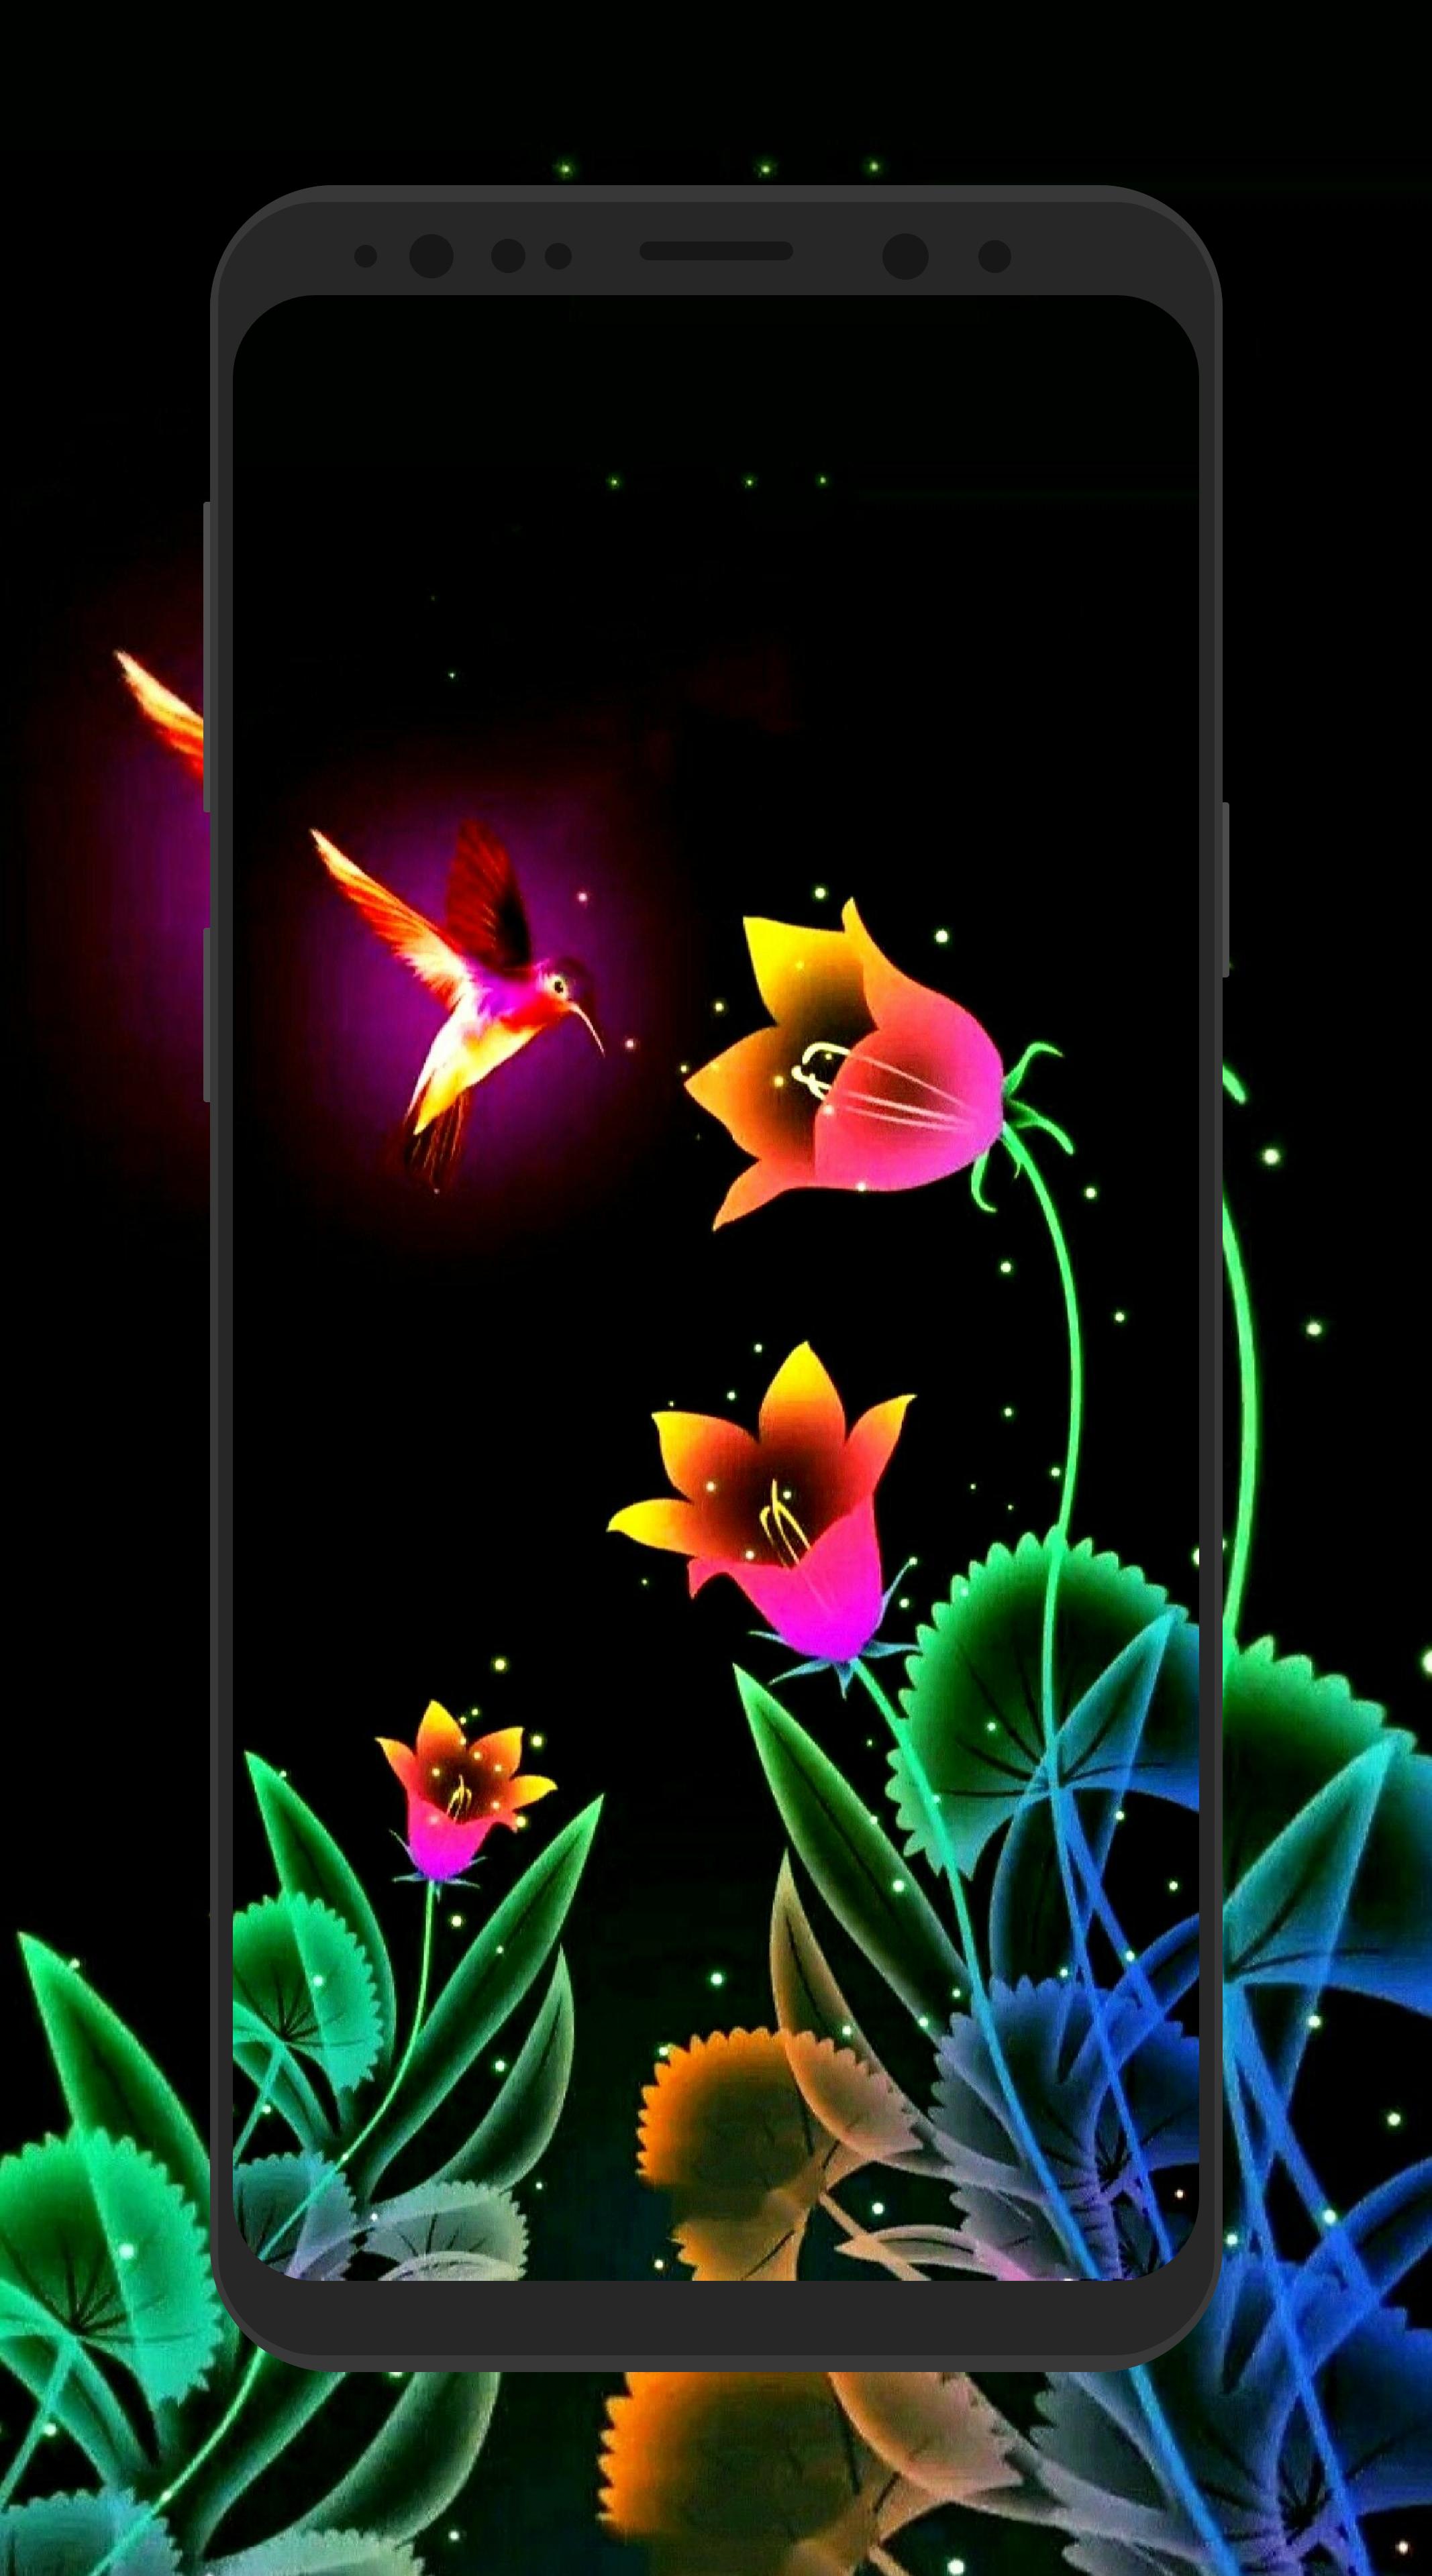 Glowing Flowers Wallpaper 2020 For Android Apk Download